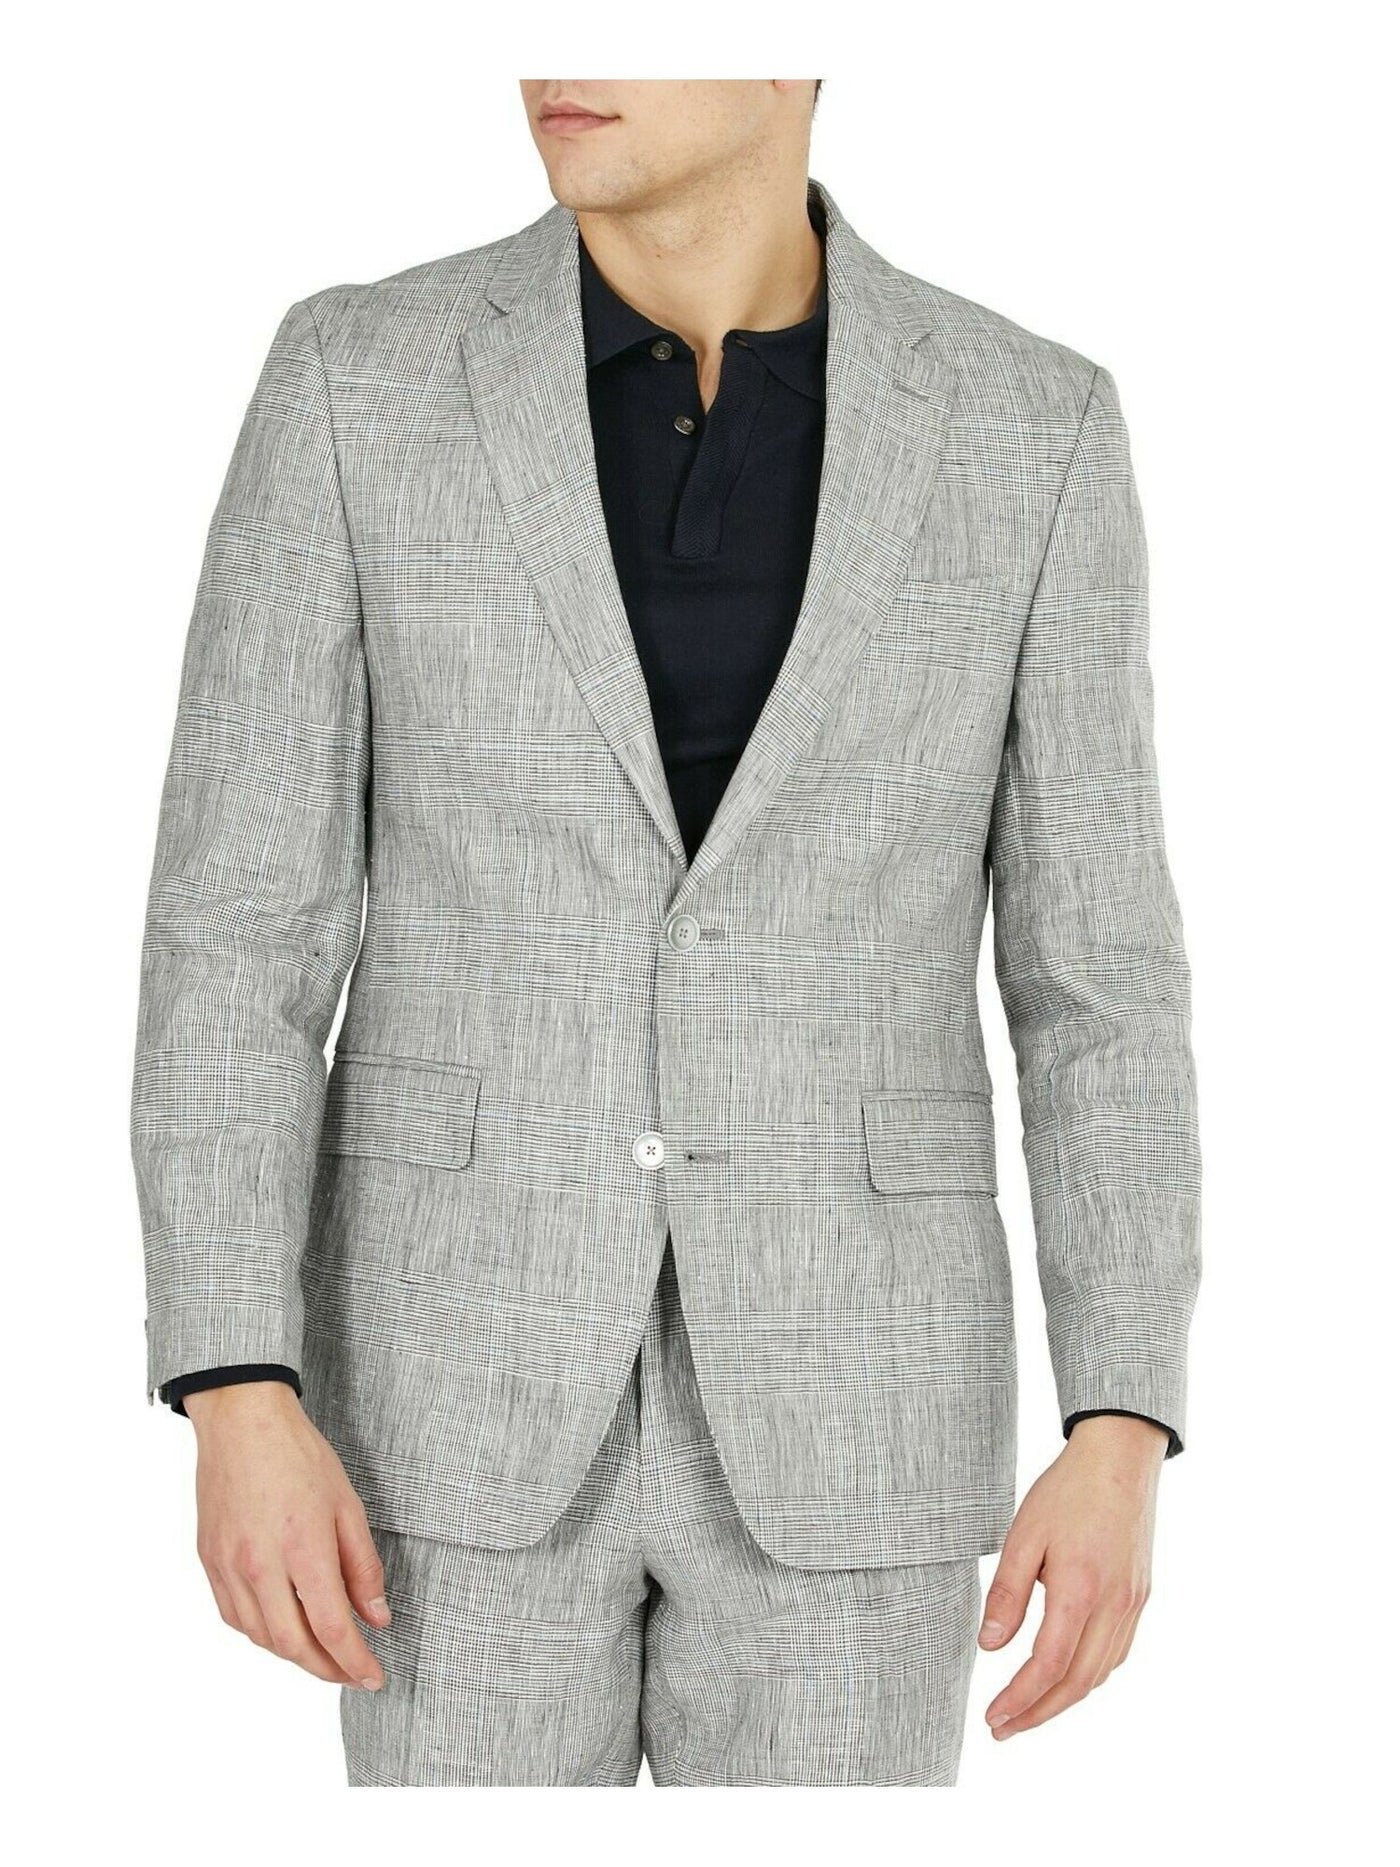 TOMMY HILFIGER Mens Gray Single Breasted, Plaid Classic Fit Suit Separate Blazer Jacket 41 R